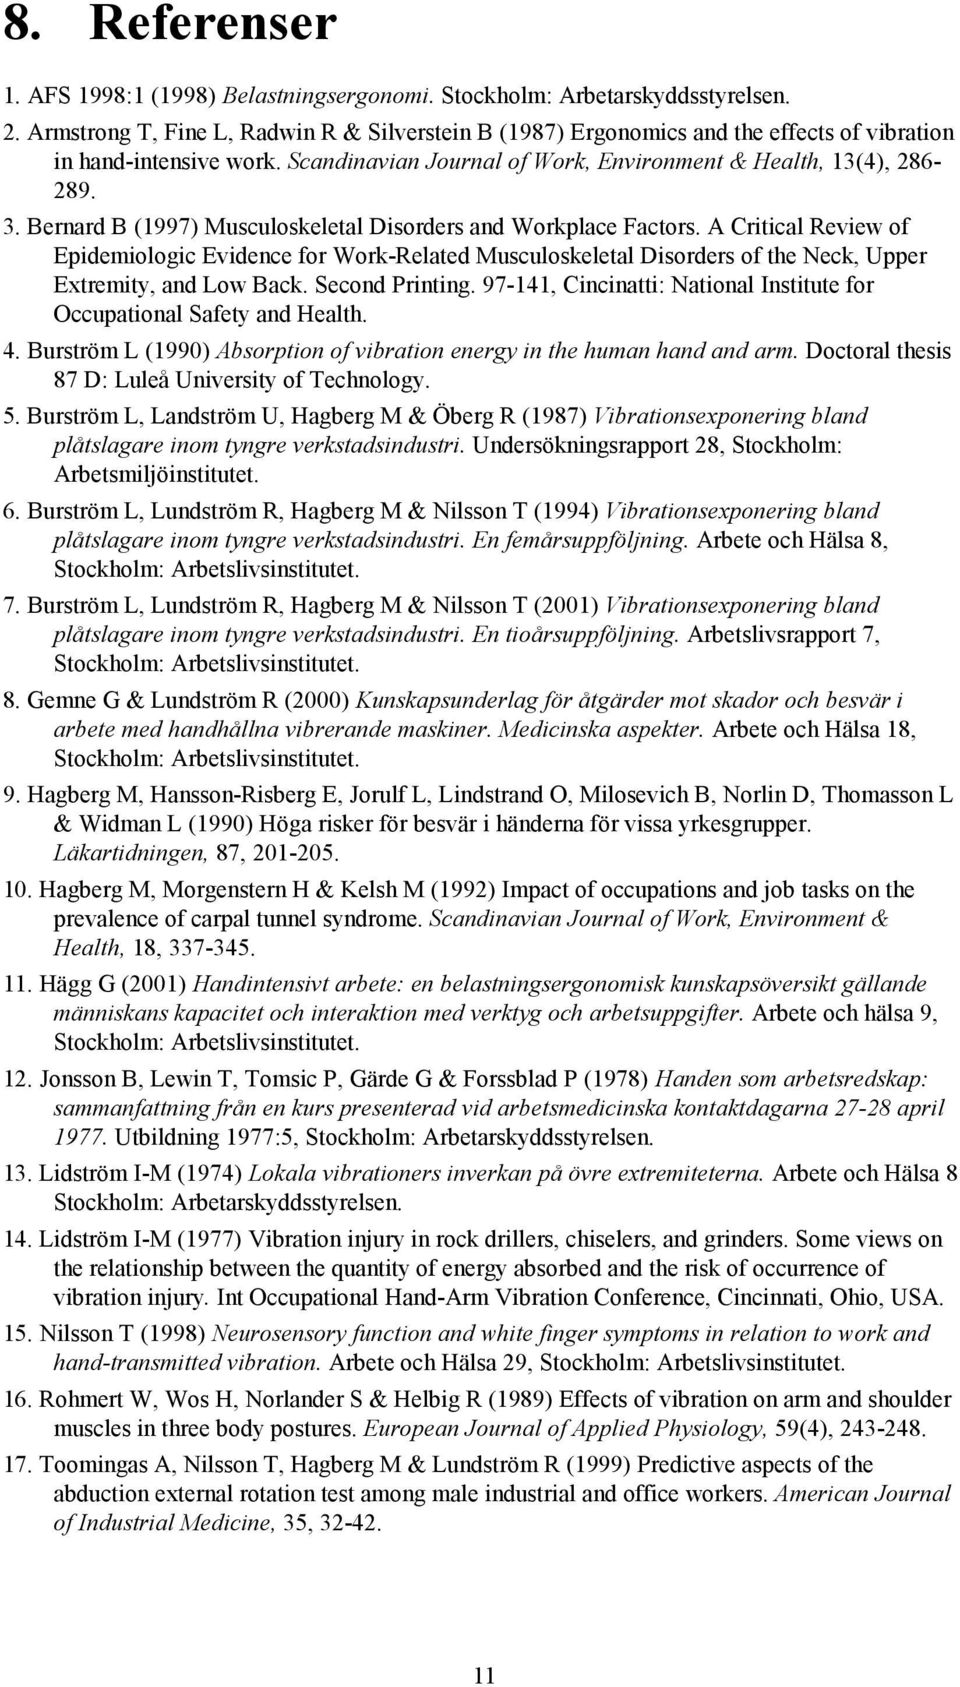 Bernard B (1997) Musculoskeletal Disorders and Workplace Factors. A Critical Review of Epidemiologic Evidence for Work-Related Musculoskeletal Disorders of the Neck, Upper Extremity, and Low Back.